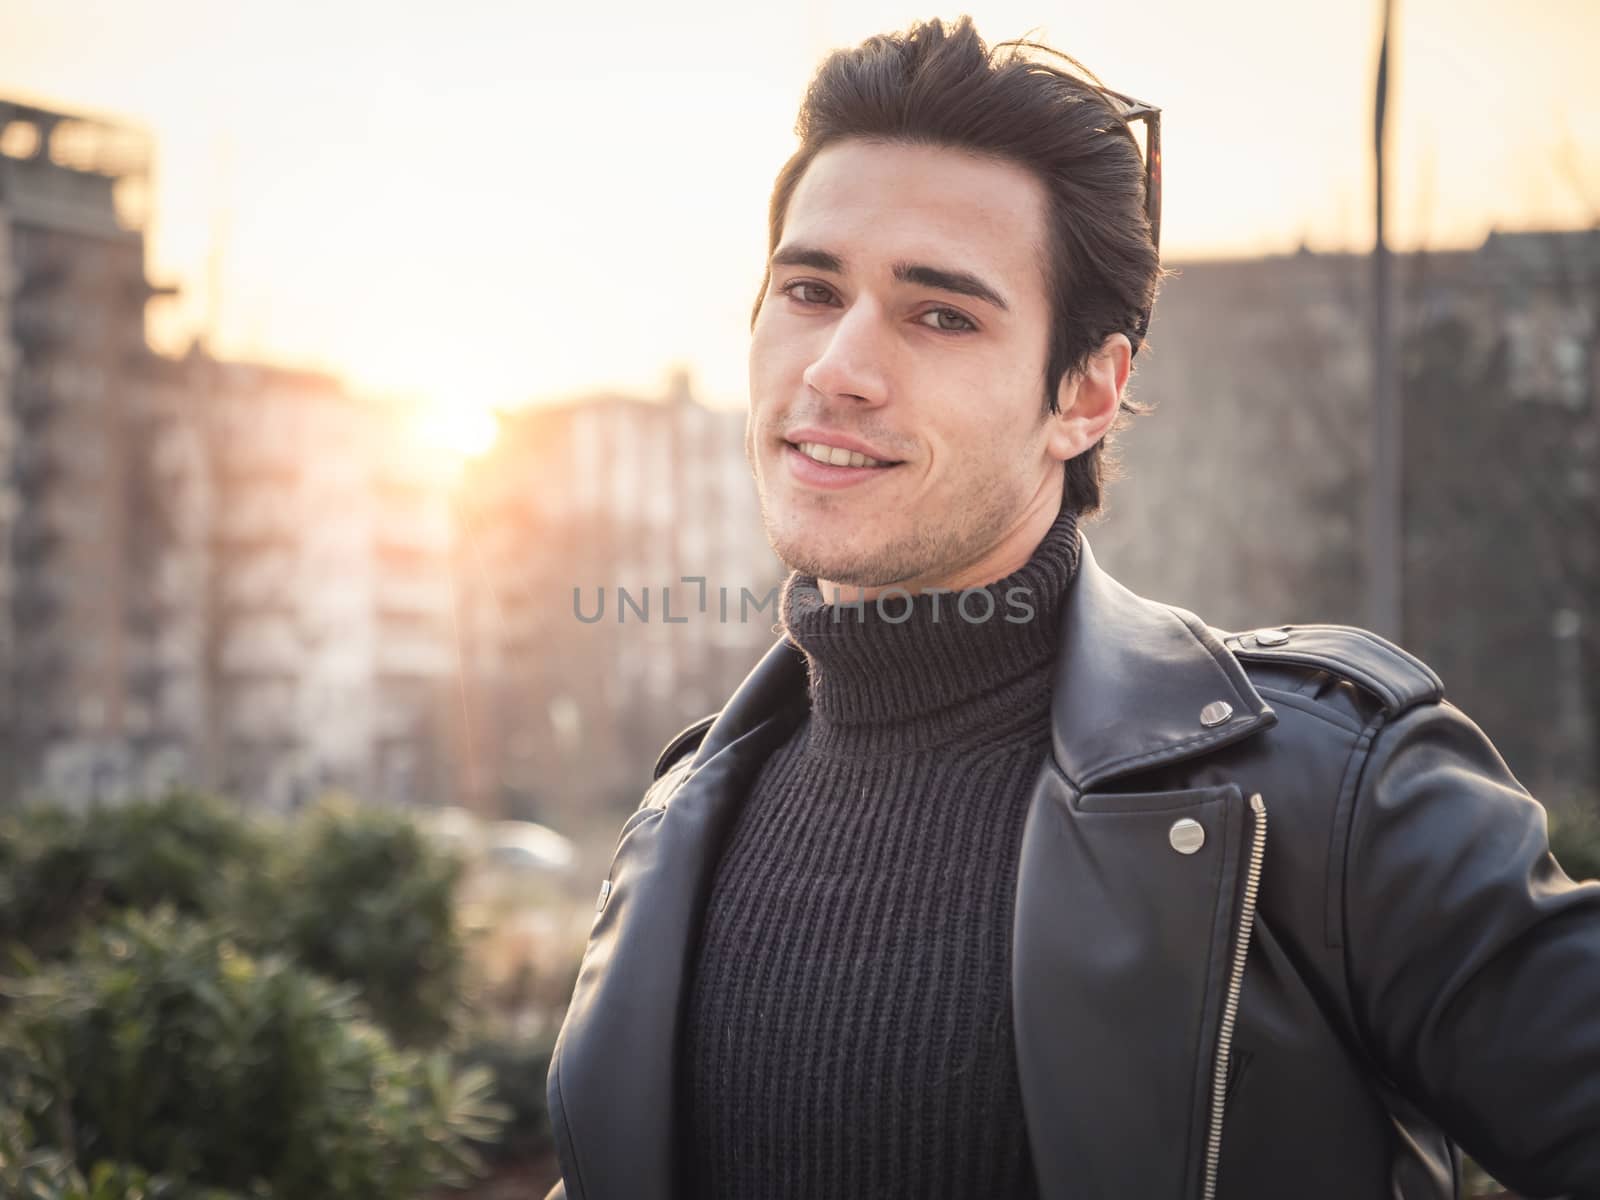 One handsome young man in urban setting in modern city, standing, wearing black leather jacket and jeans, looking at camera, at sunset